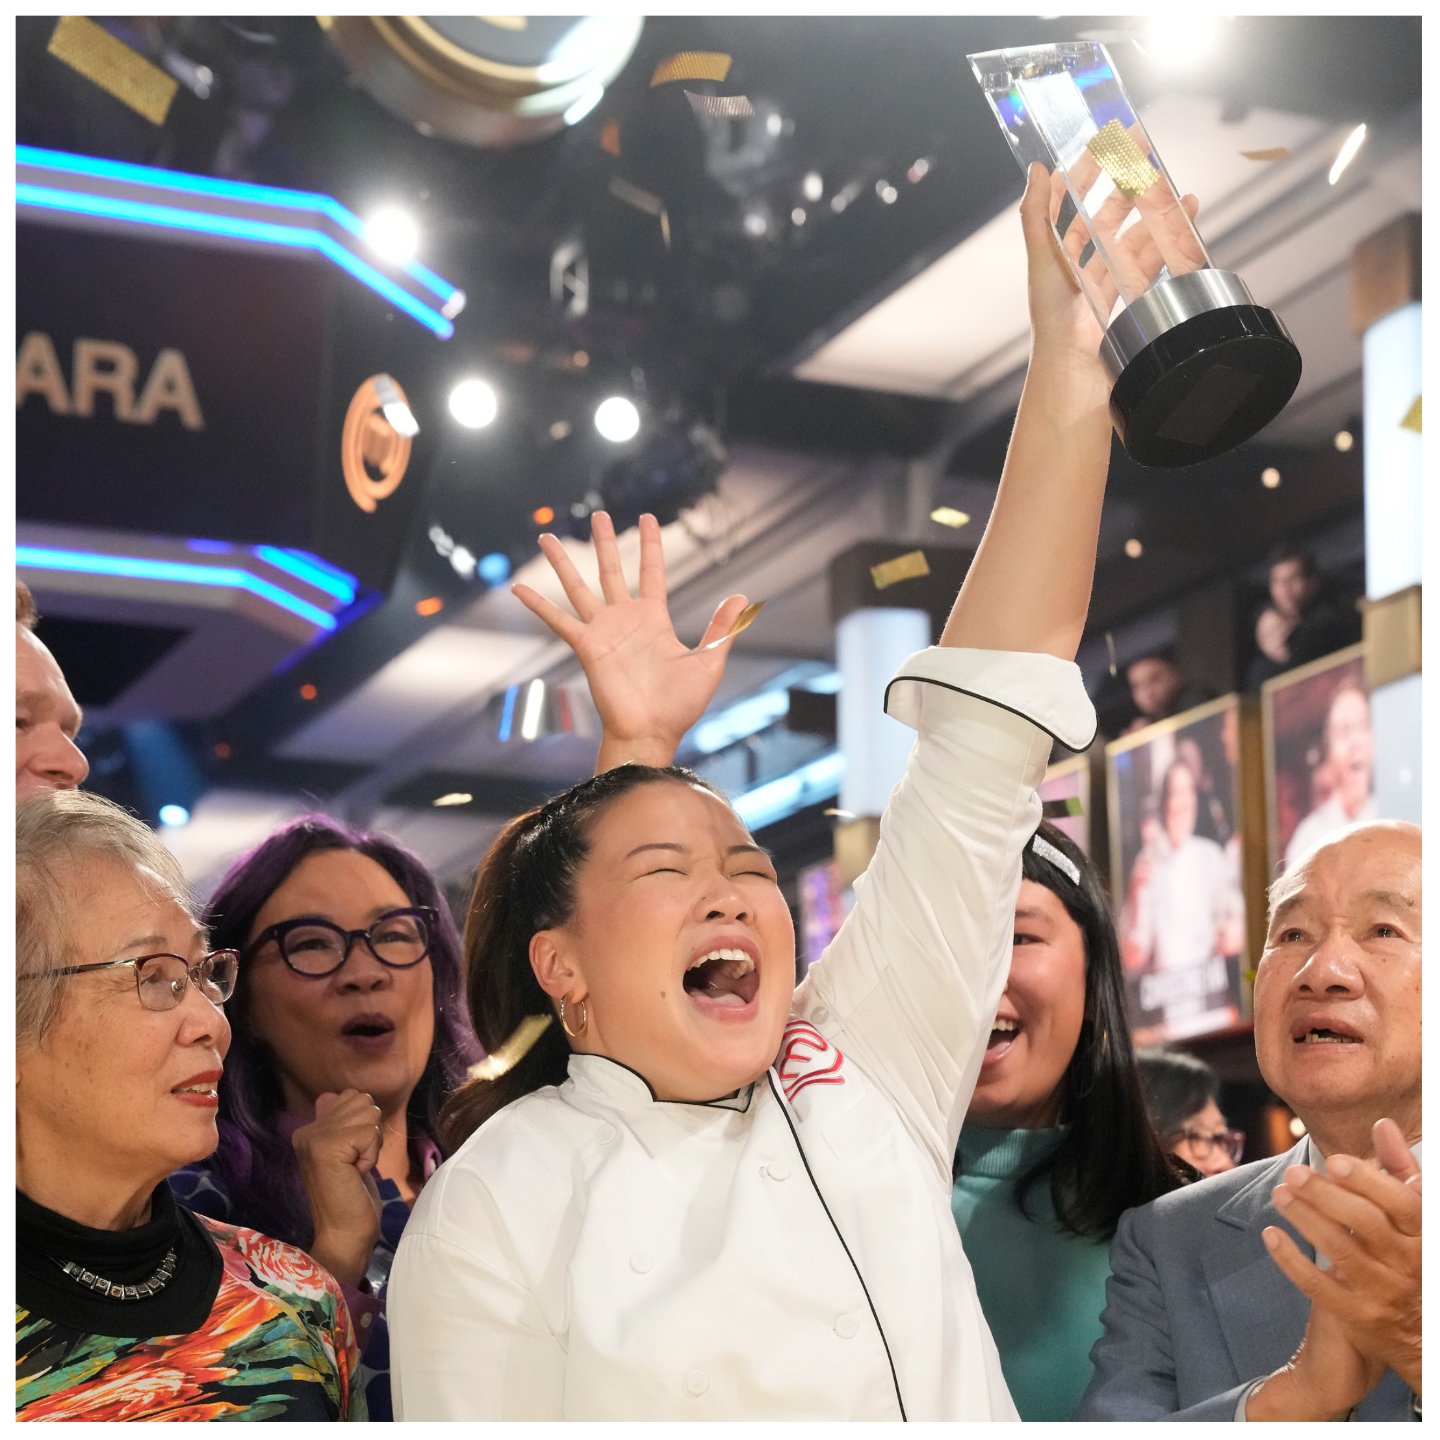 Dara Yu won 'MasterChef: Back to Win' and proudly holds the trophy over her head while surrounded by her family